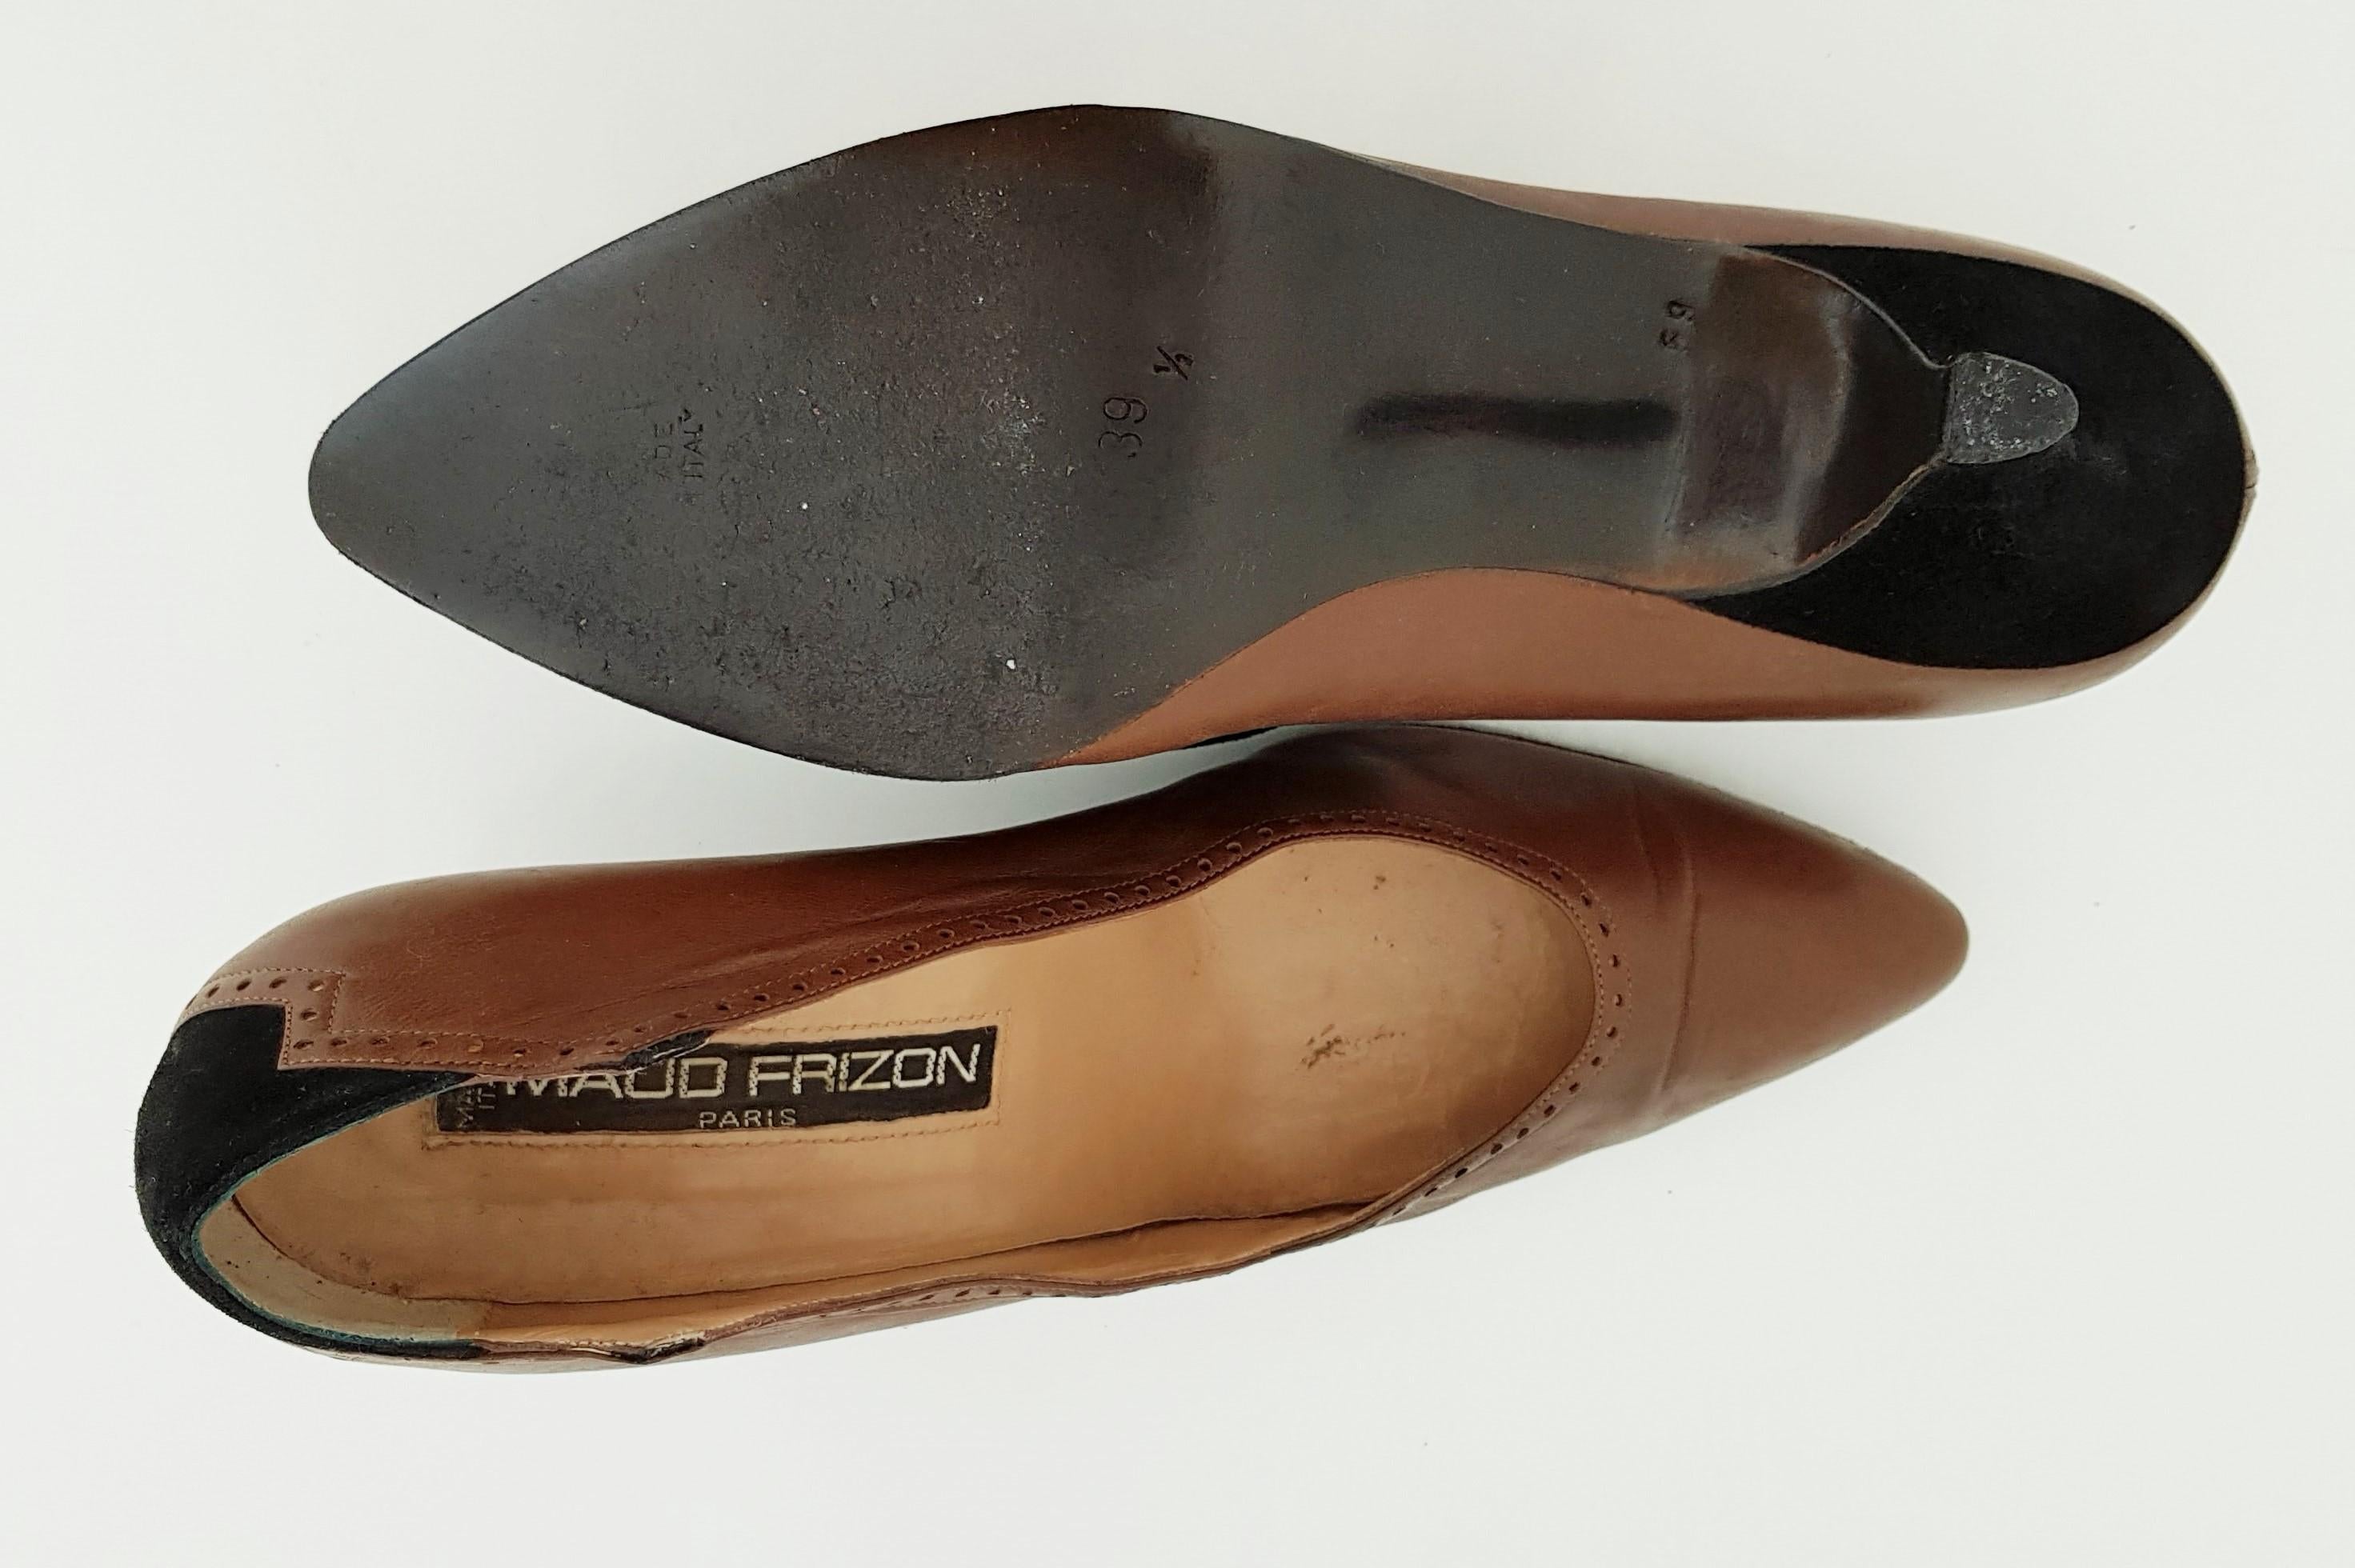 Maud Frizon Black Velvet and Brown Leather Heels - Size 39 1/2 (EU) For Sale 7